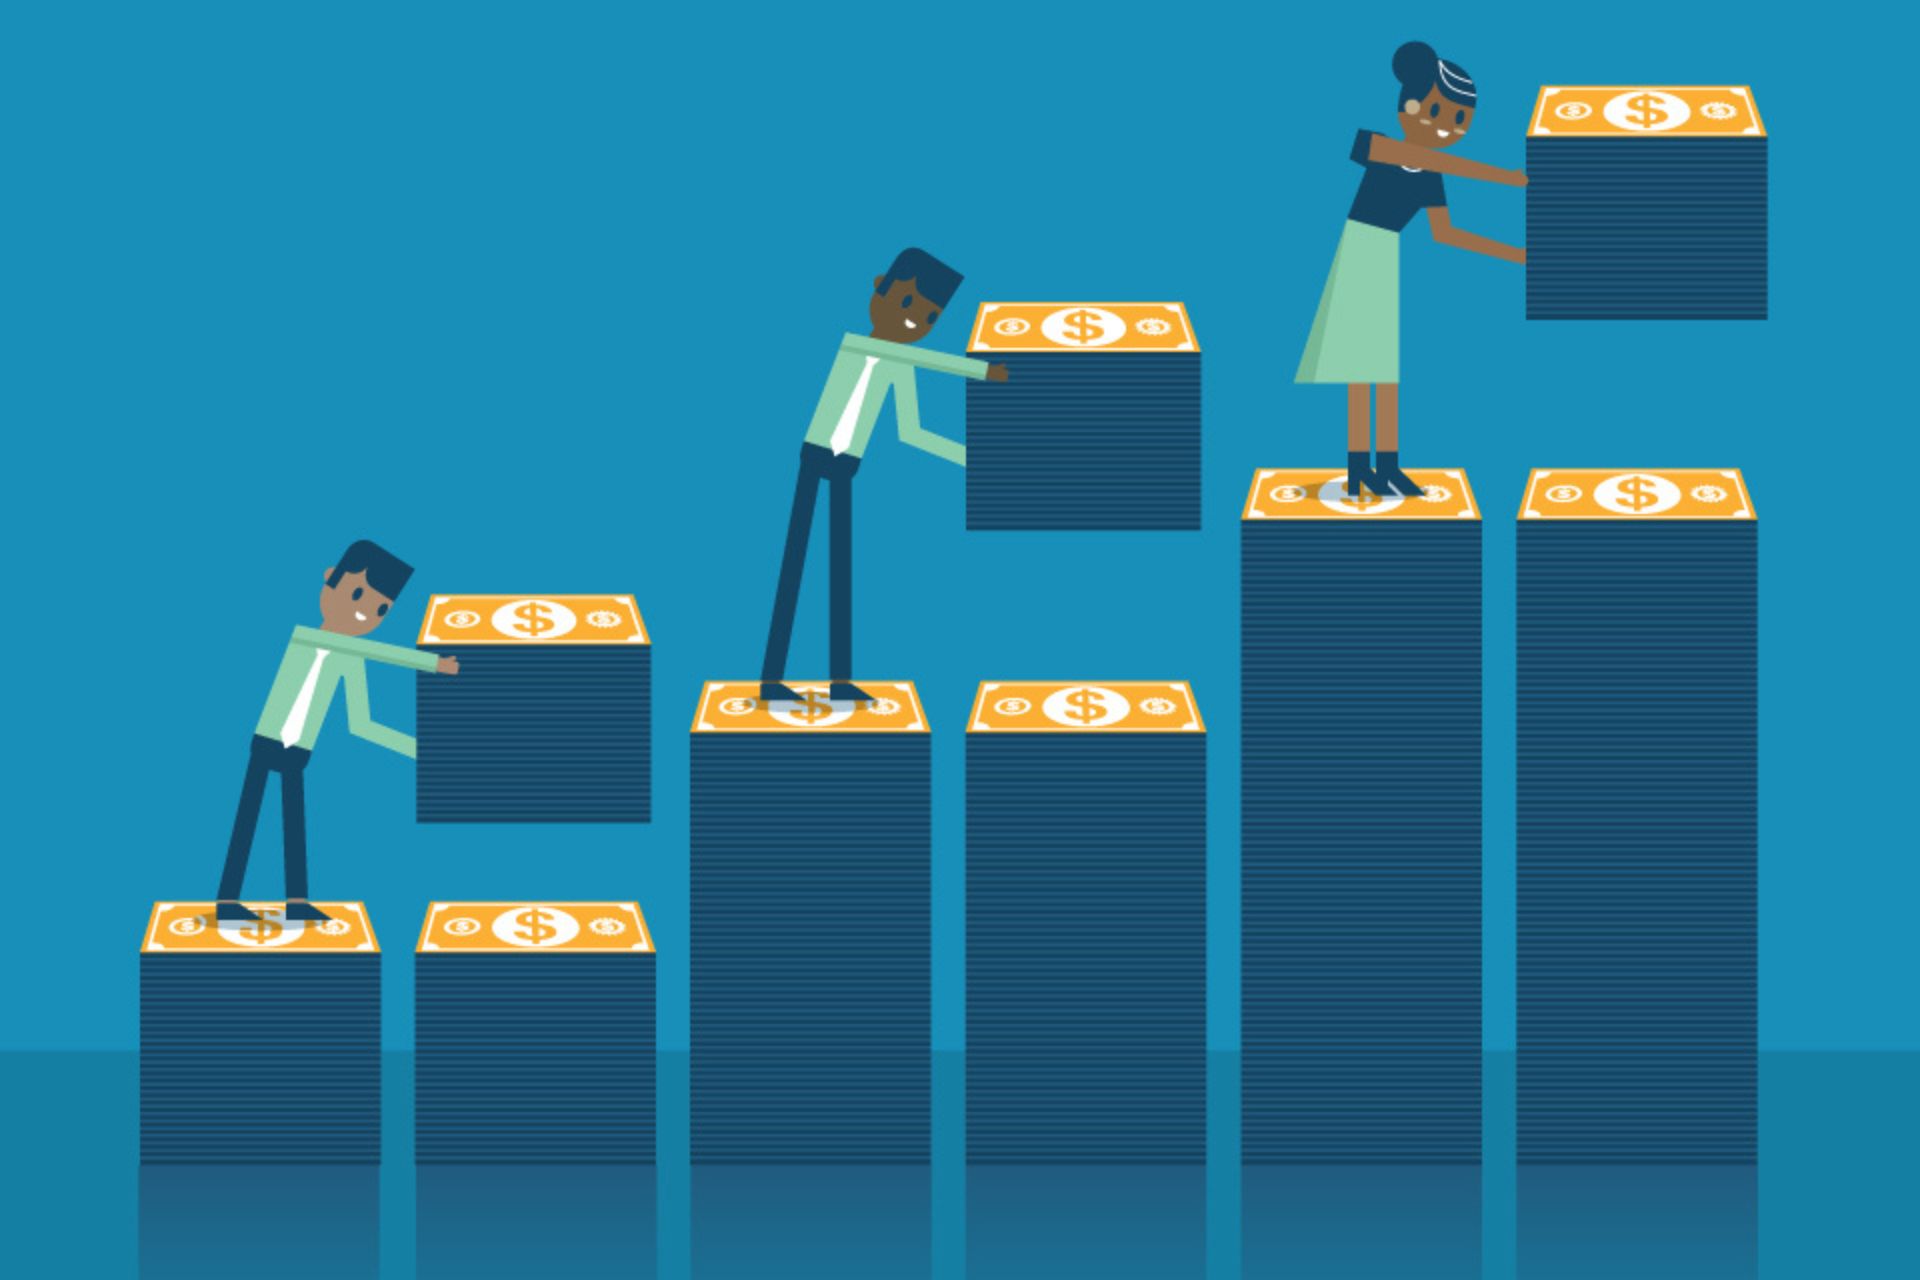 Illustration of three people standing on stacks of money of varying heights, which get taller